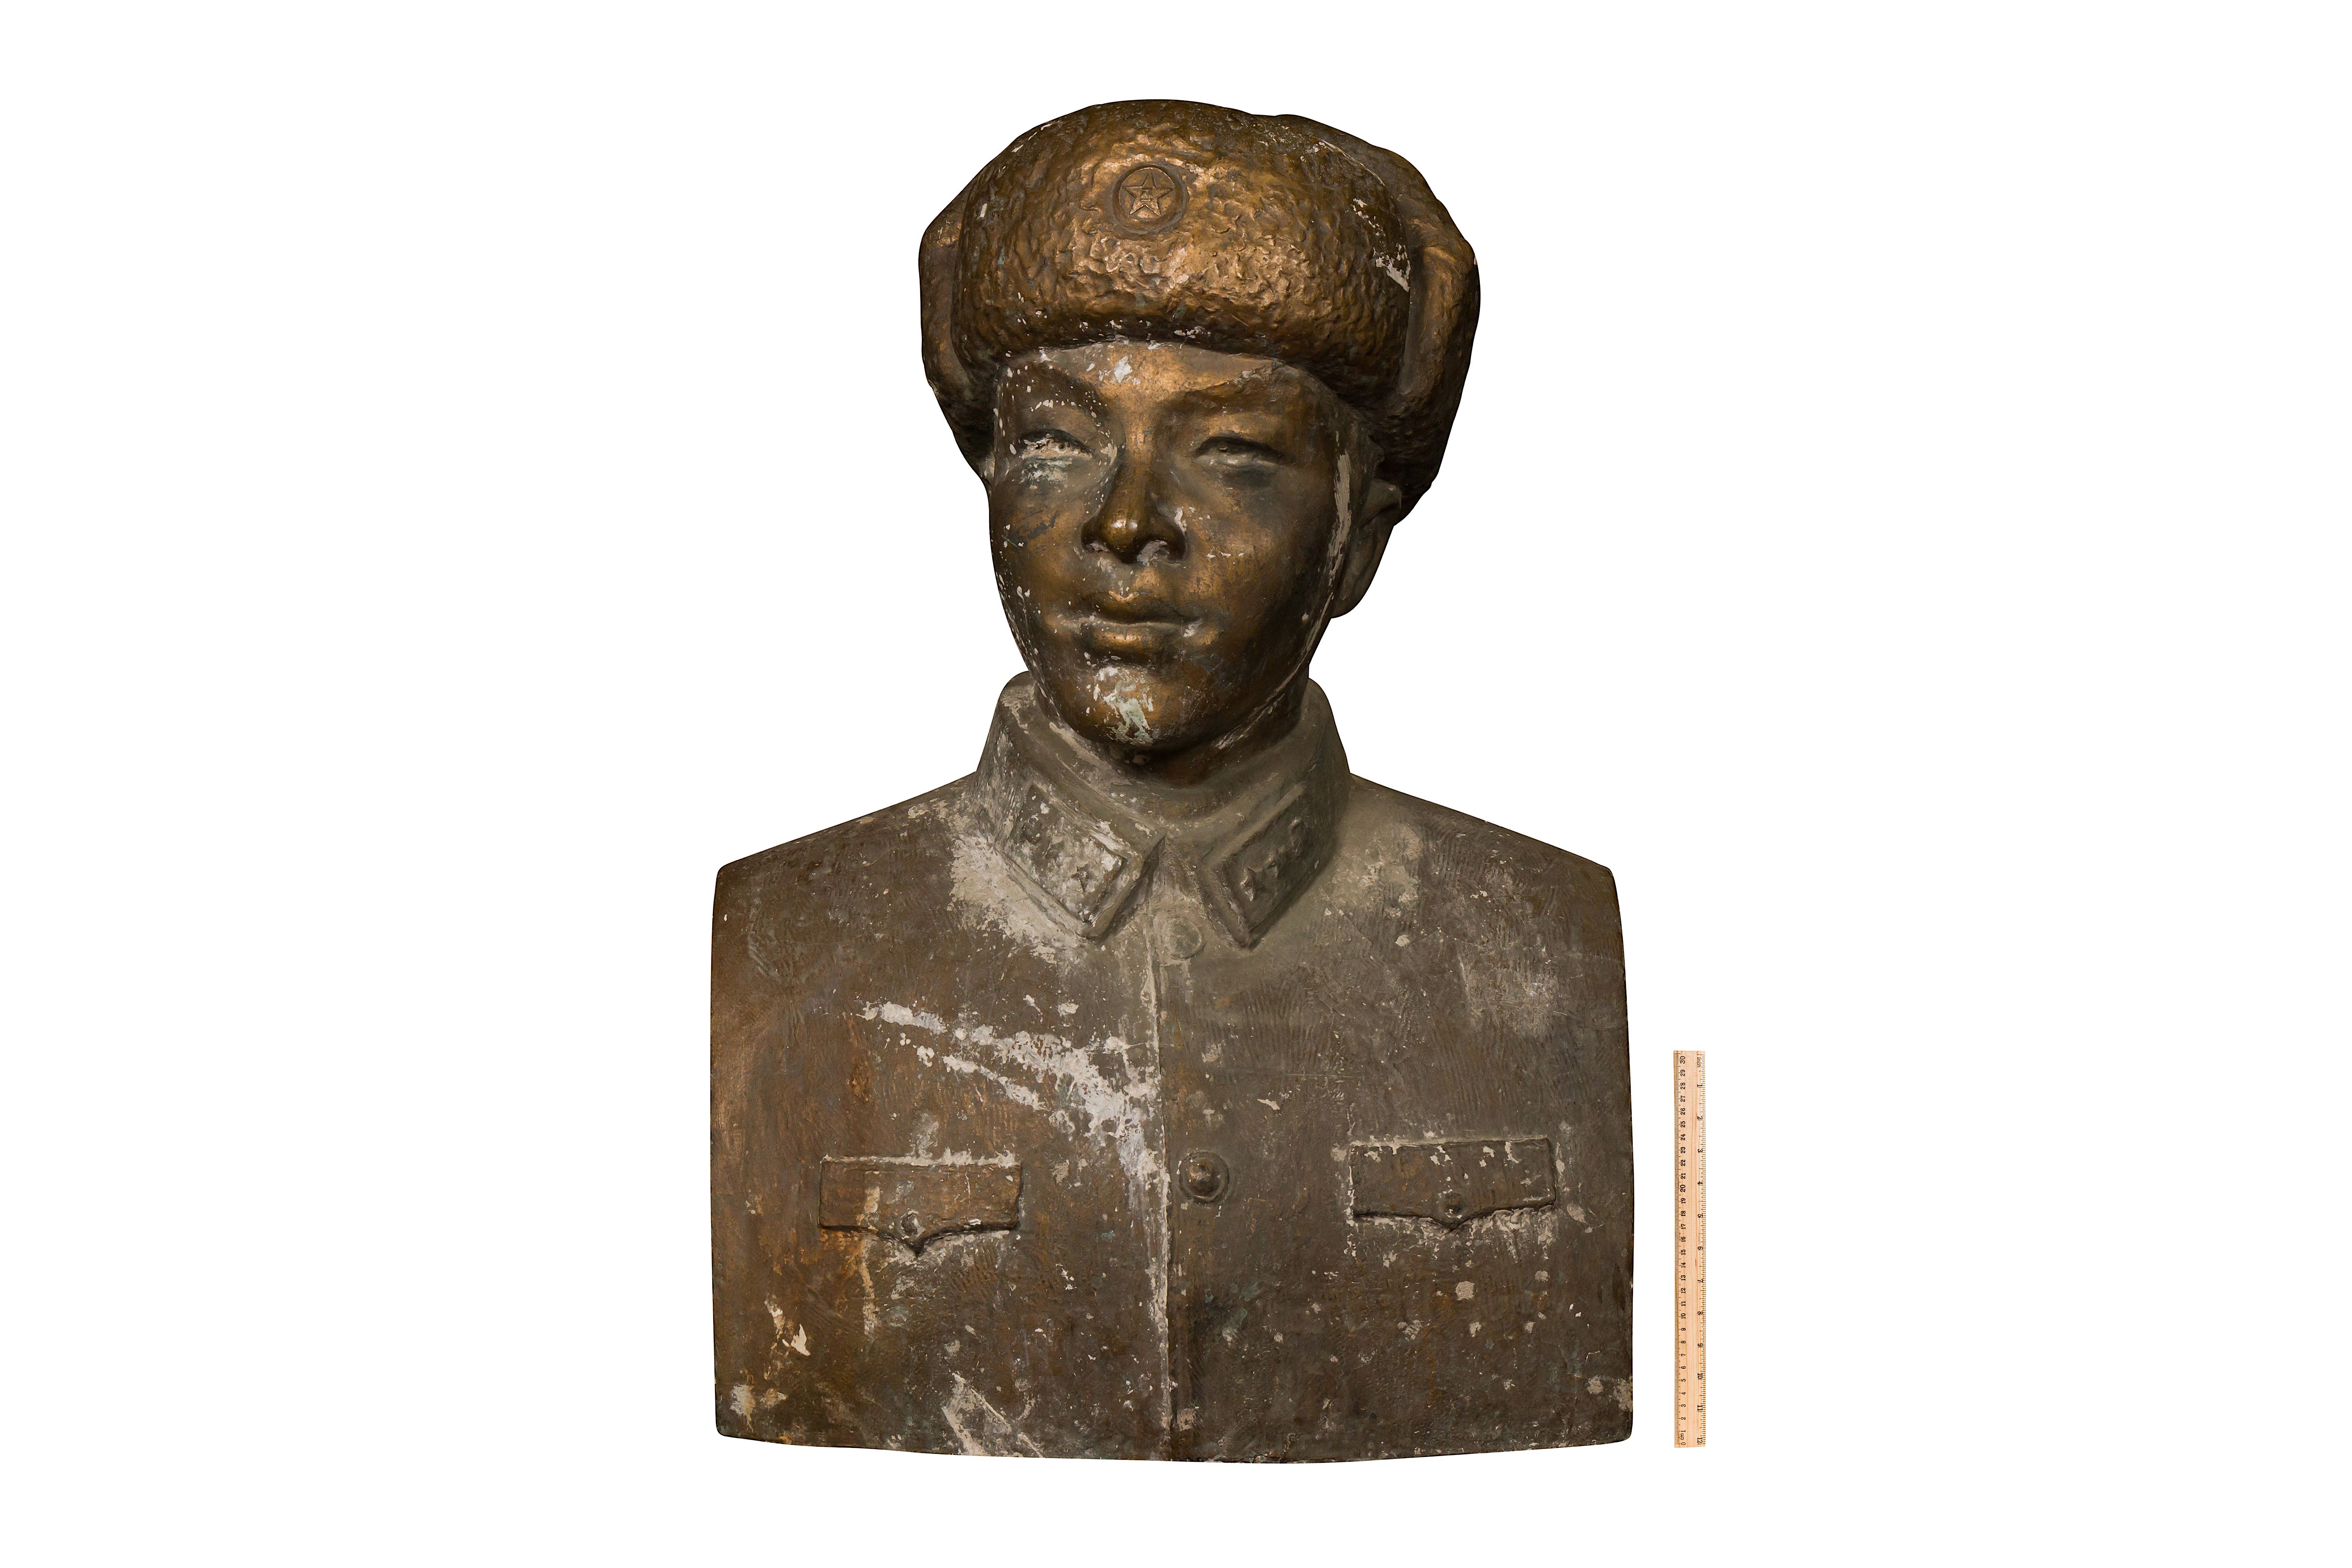 Model Hero – Lei Feng, A head and shoulders bronzed bust of Lei Feng